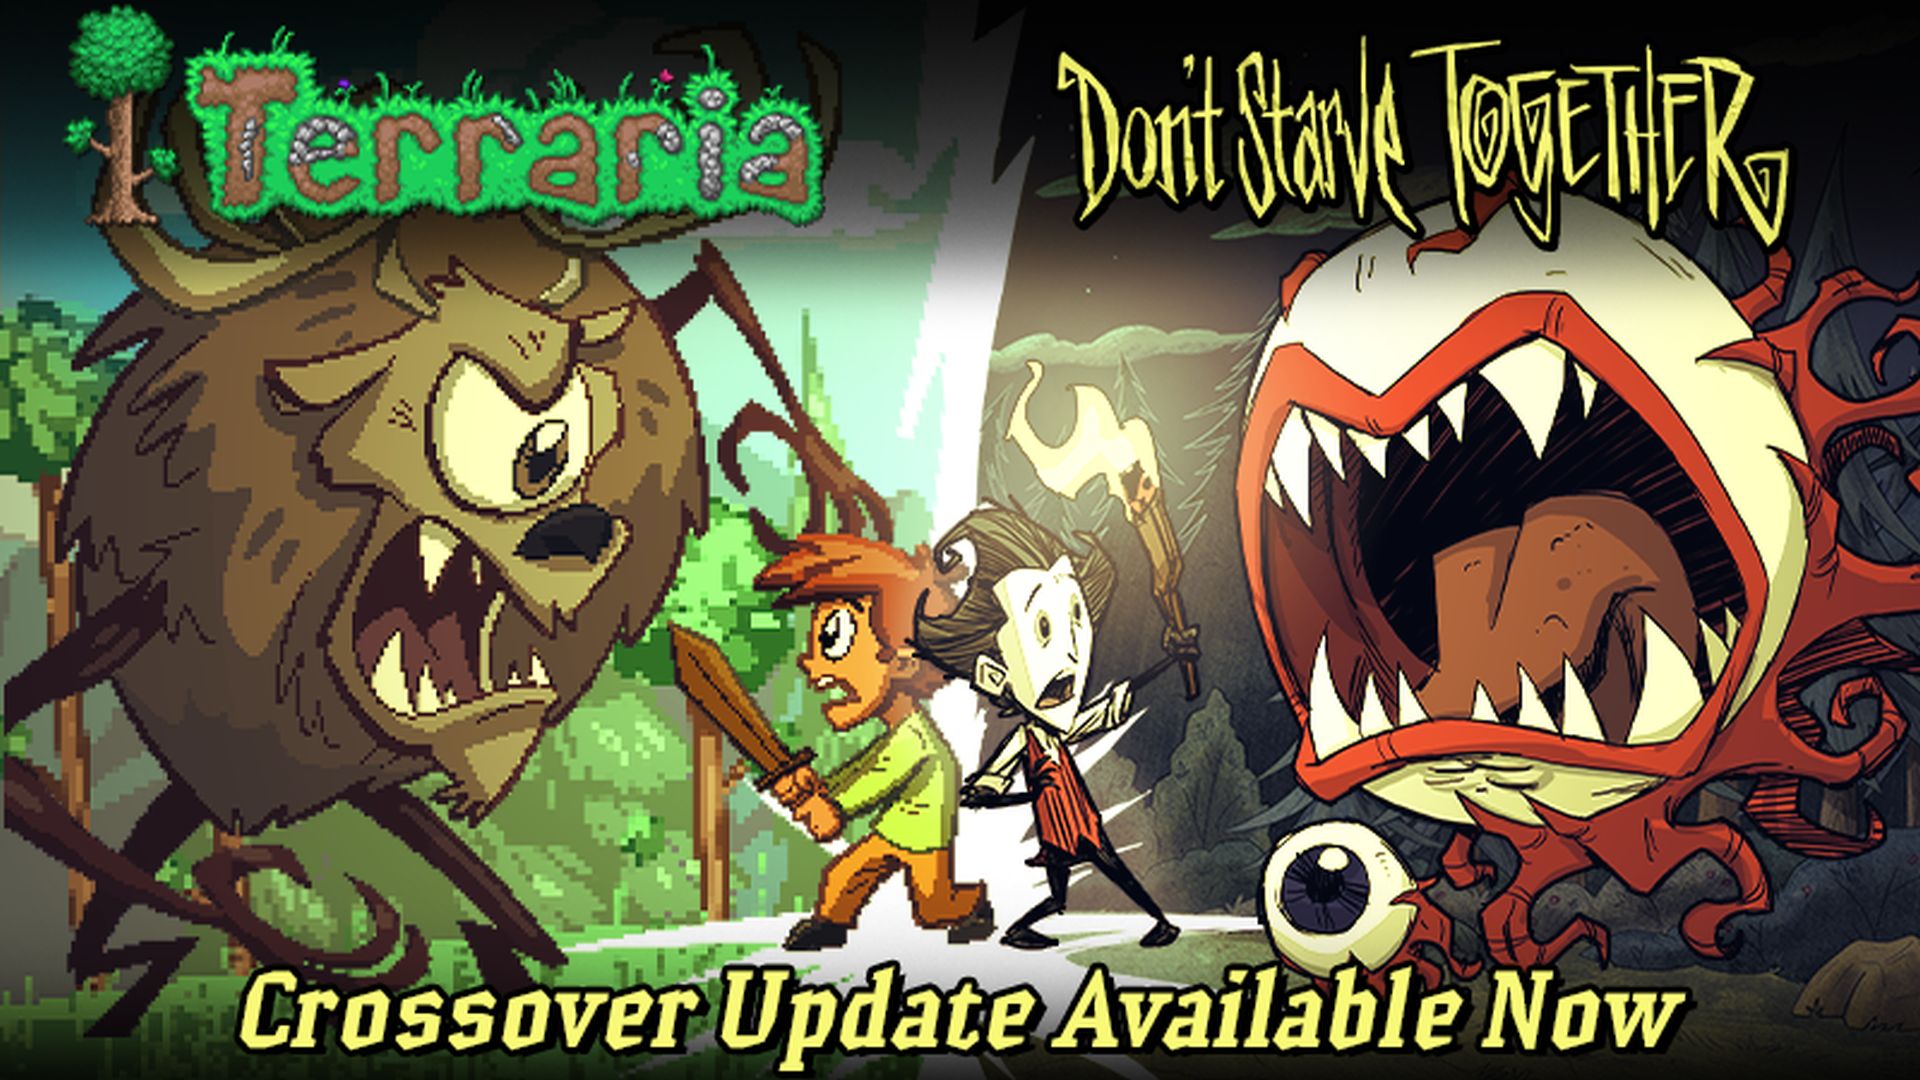 Don't Starve Together: An Eye for An Eye x Terraria - 2 New Bosses